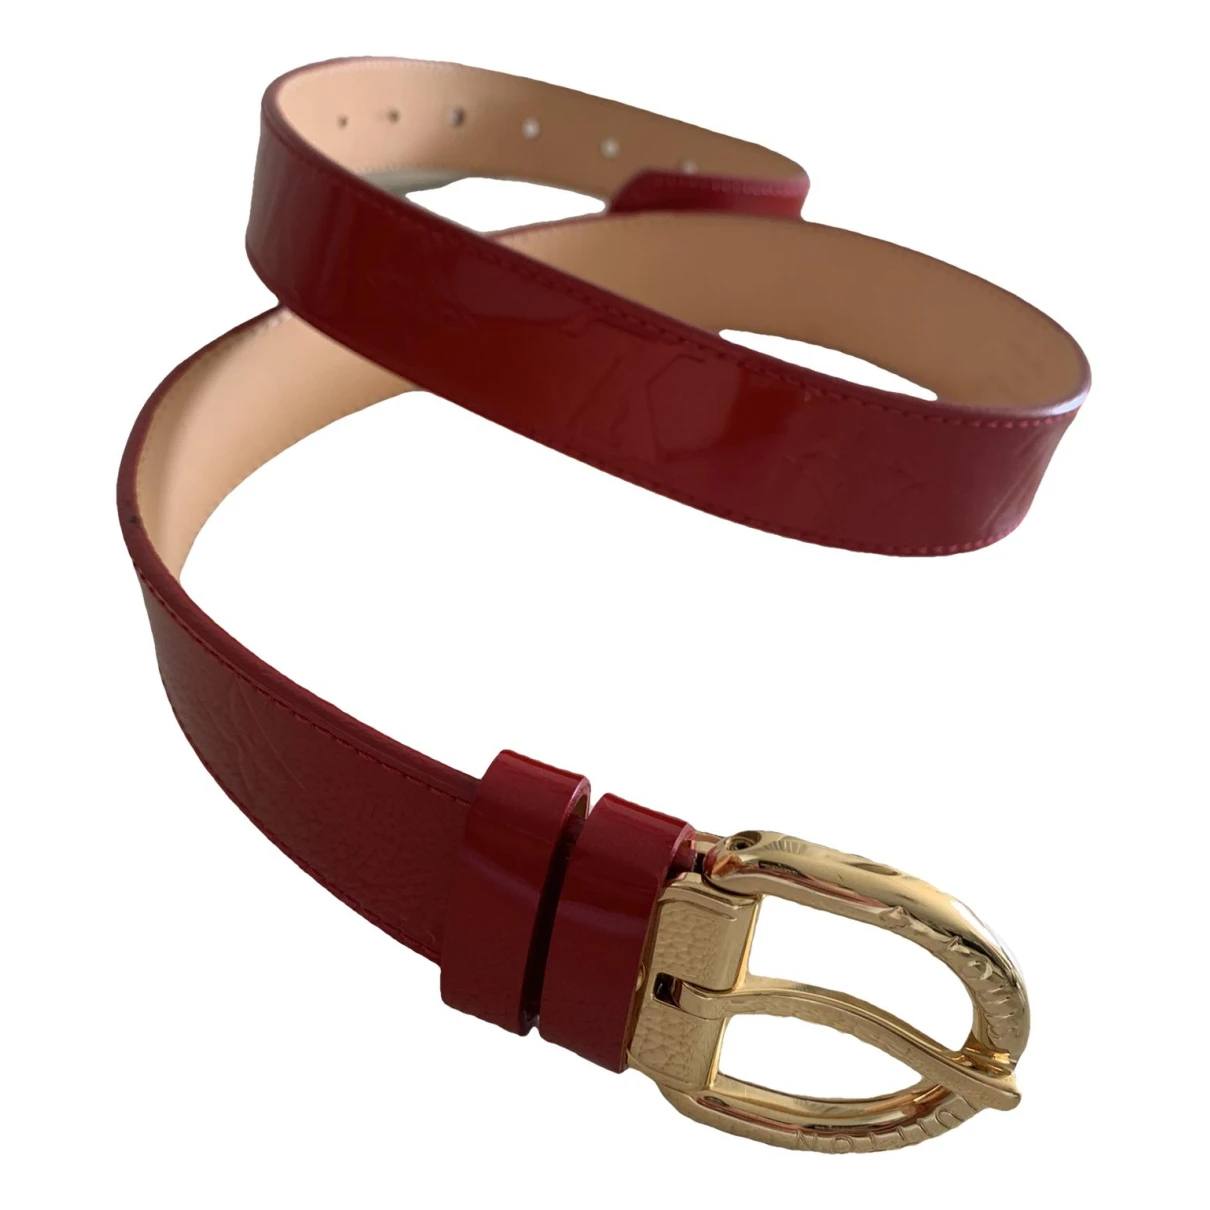 accessories Louis Vuitton belts for Female Patent leather 80 cm. Used condition